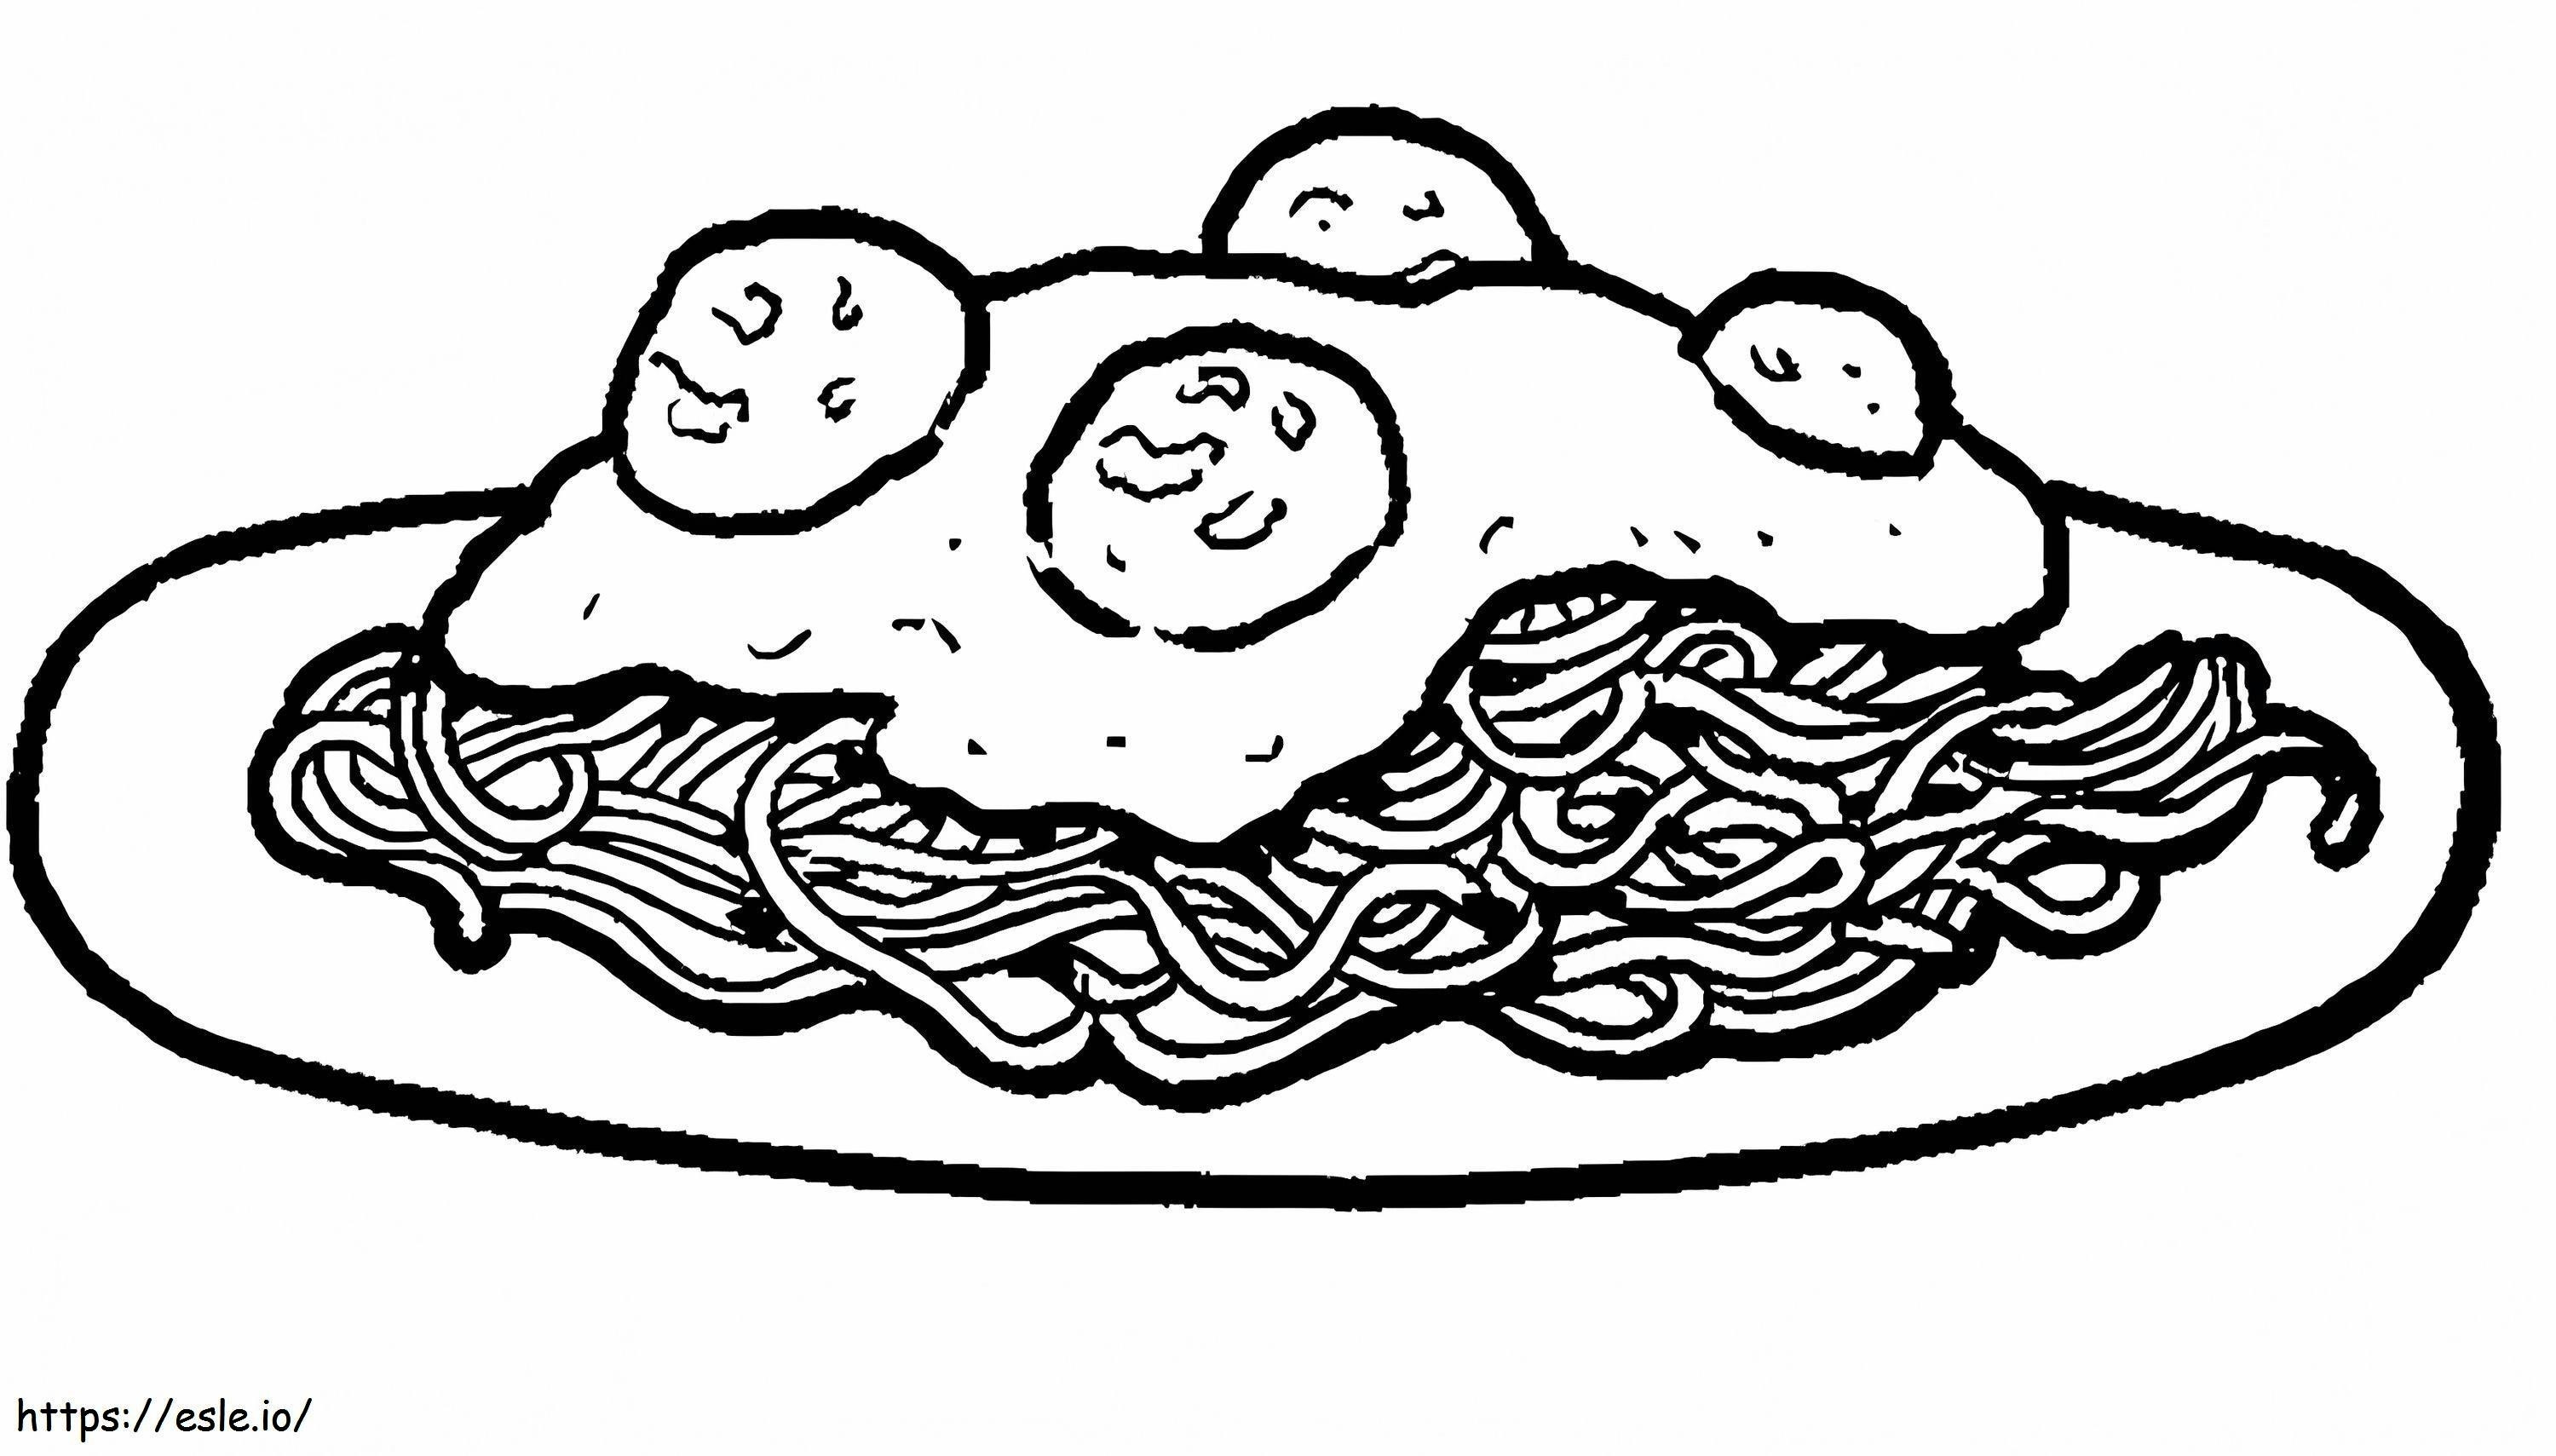 Pasta With 4 Eggs coloring page